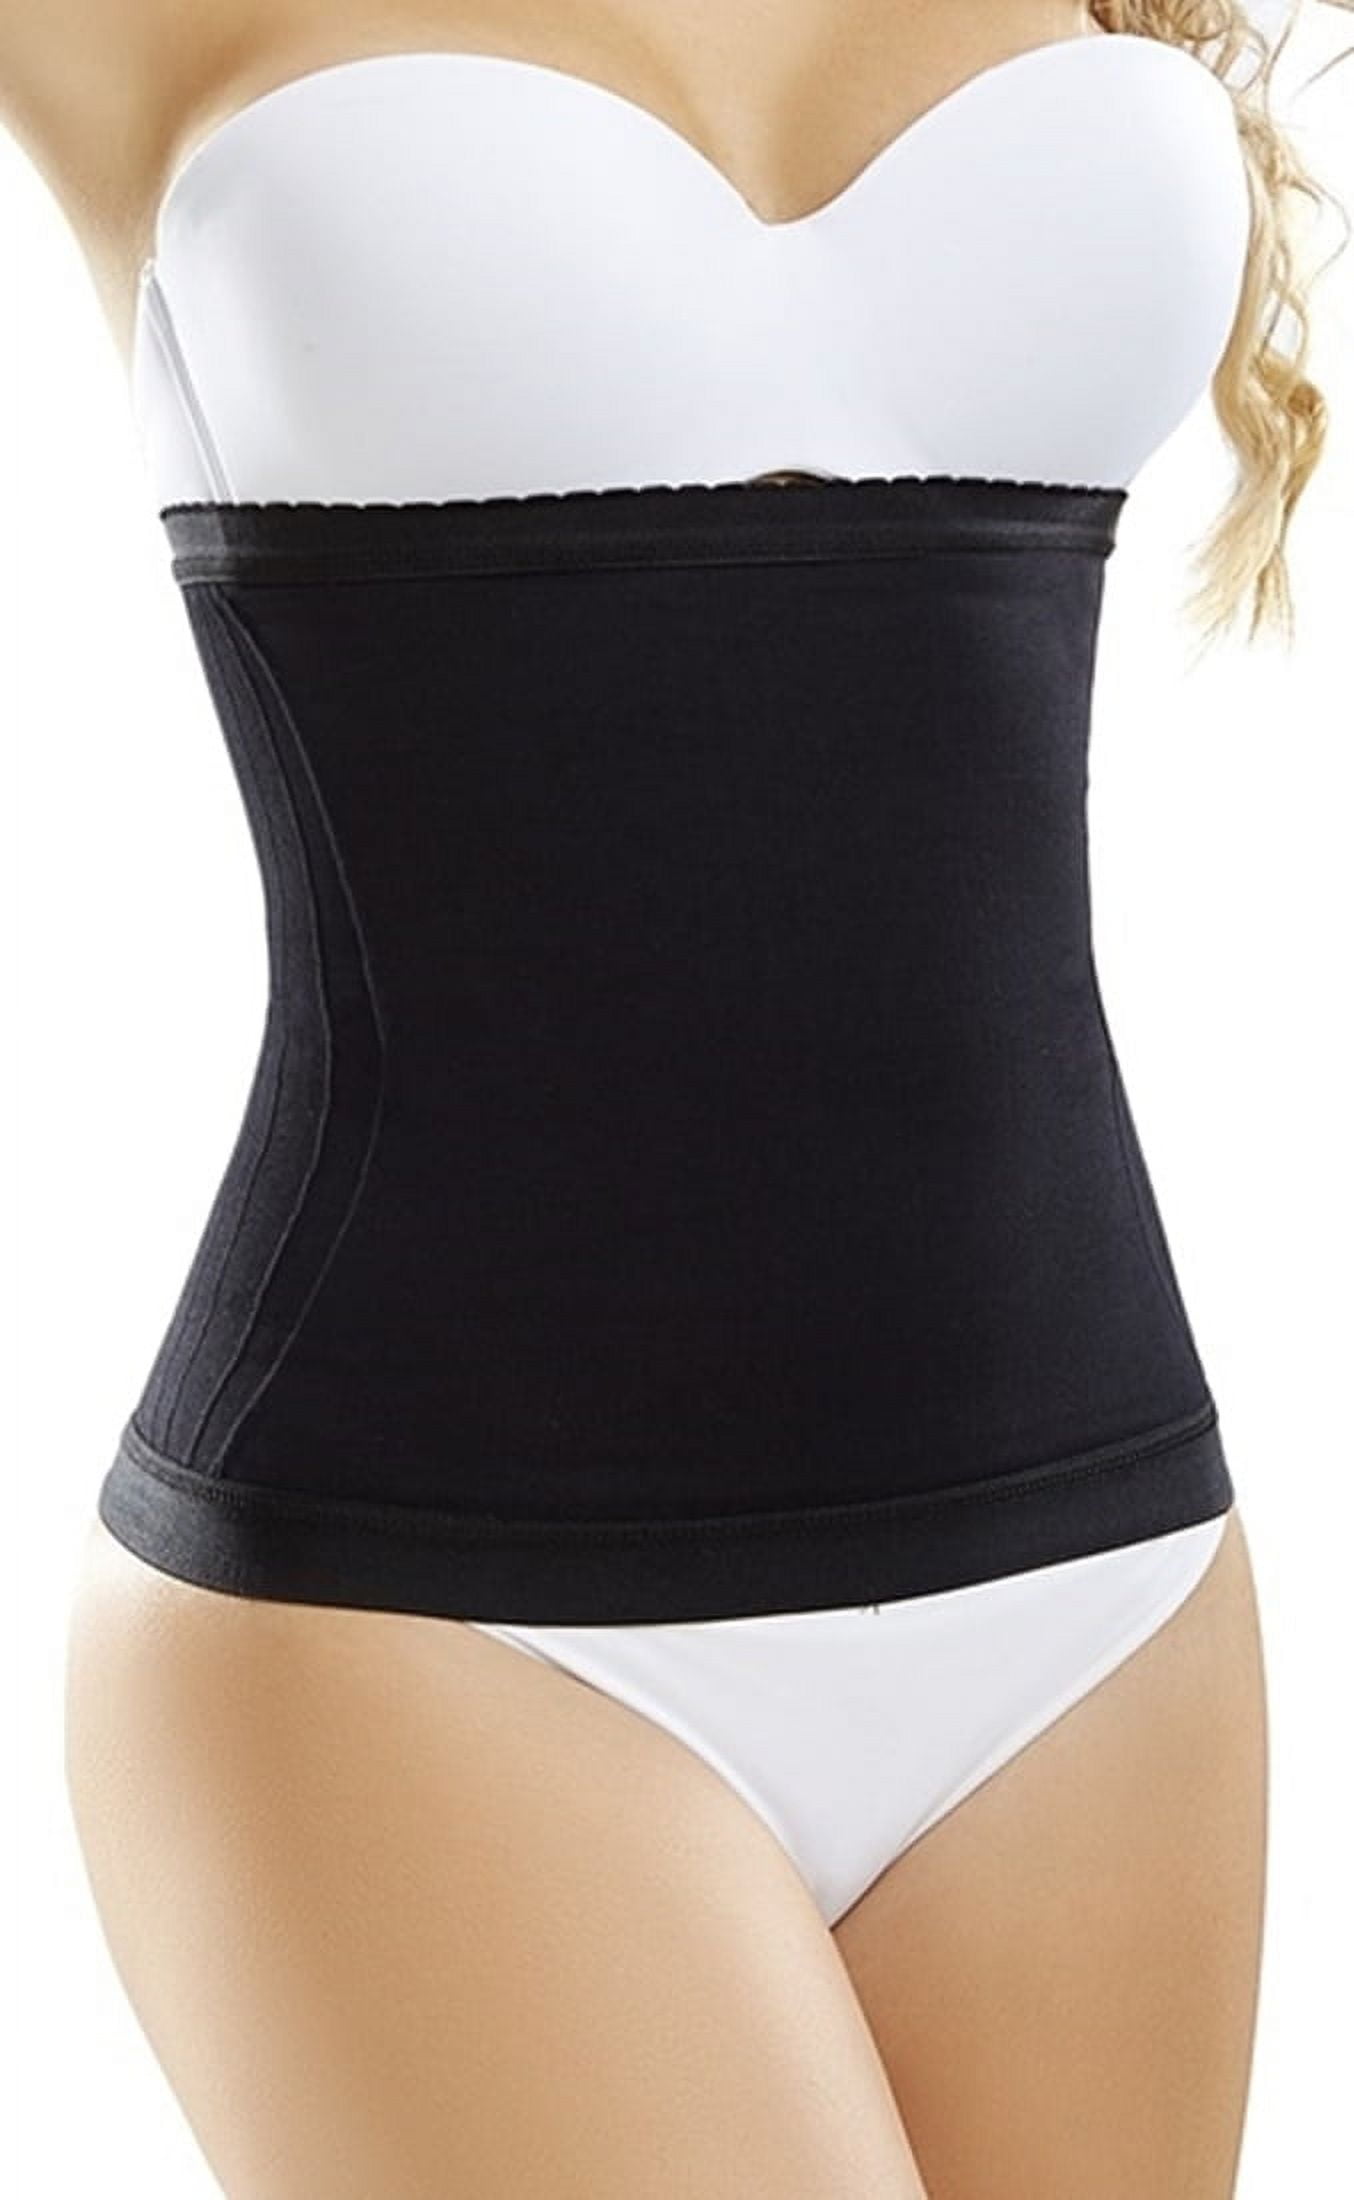 Fajas Colombianas Reductoras Shapewear for women Semaless No zippers, no  hooks, no straps Silicone Band Sculpts your Torso Lower stomach back  control